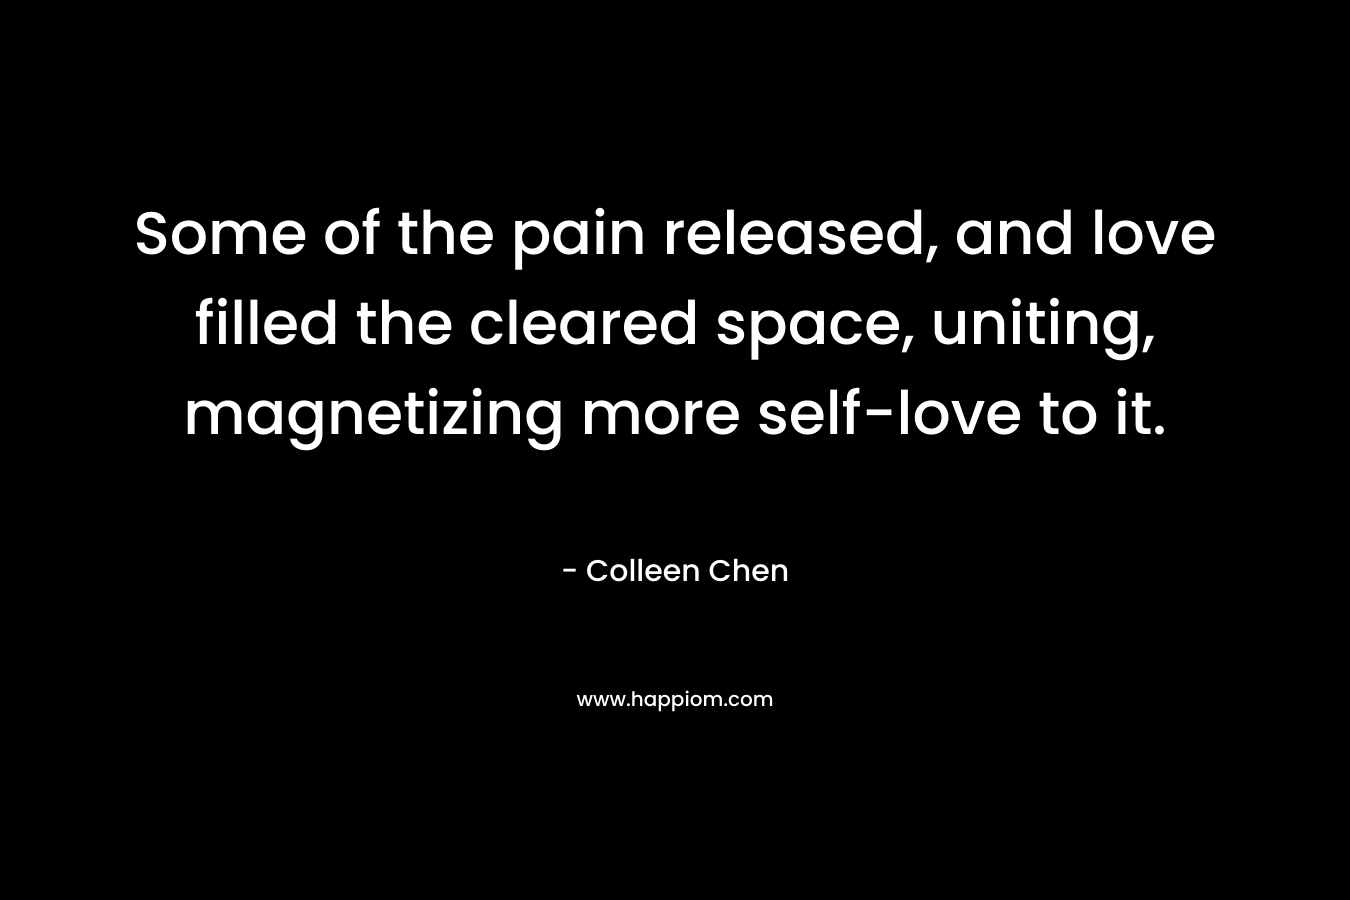 Some of the pain released, and love filled the cleared space, uniting, magnetizing more self-love to it. – Colleen Chen